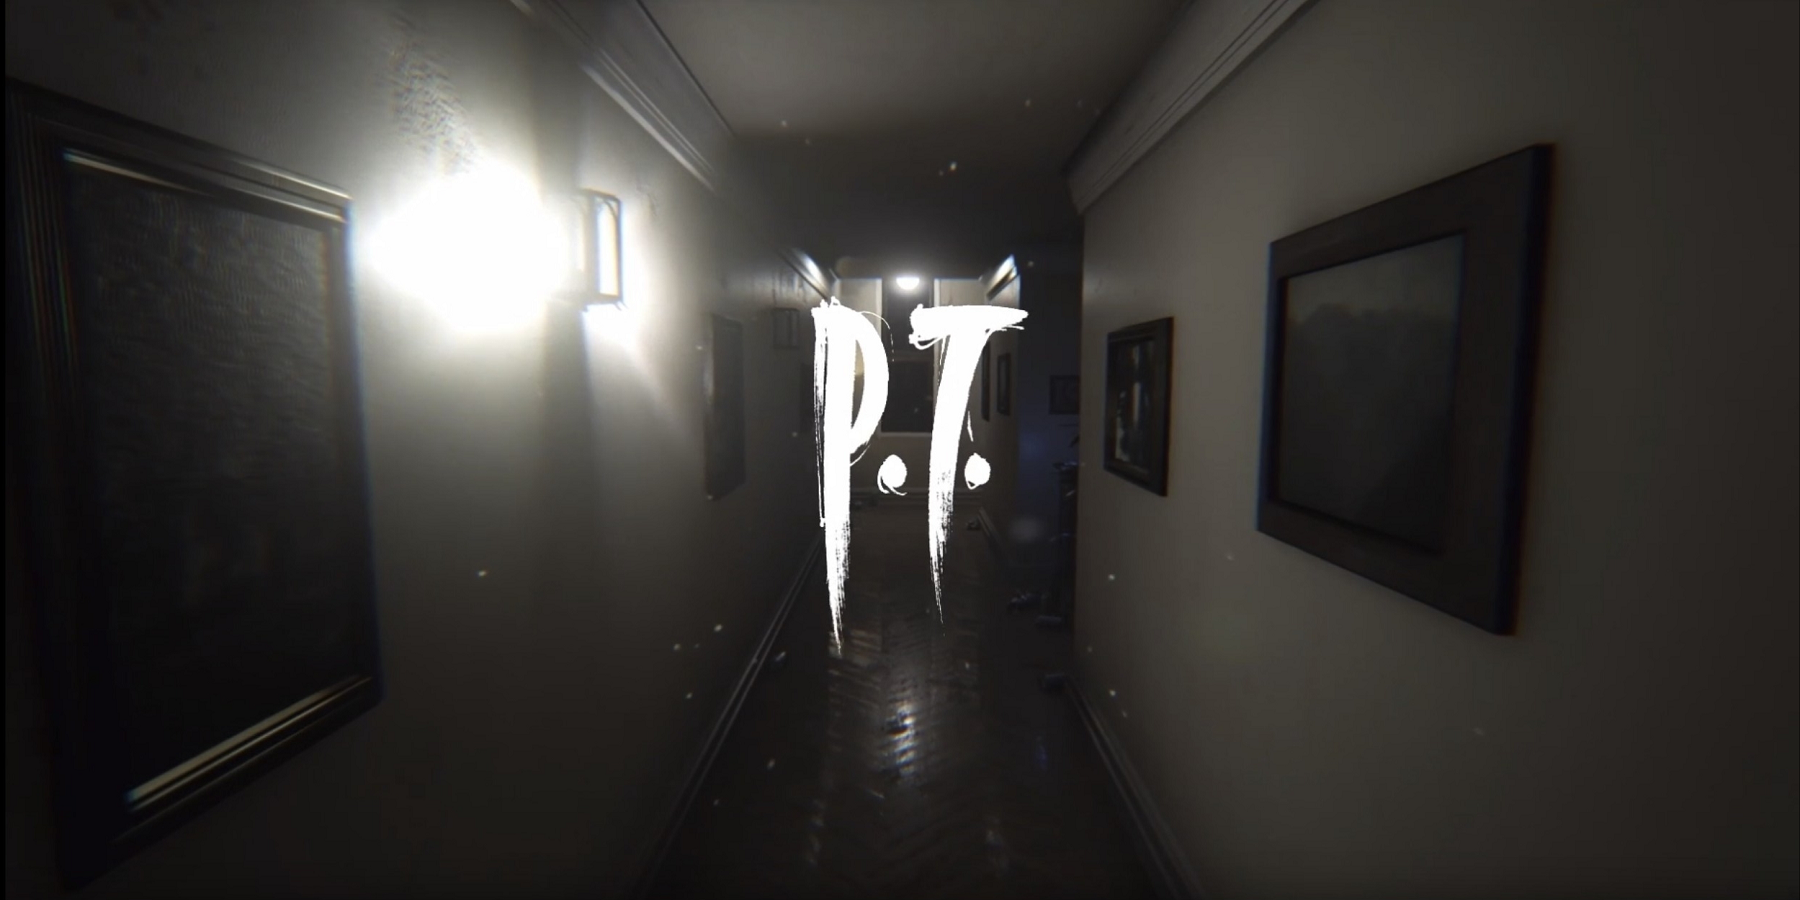 An image of the nightmarish corridor seen in the PT demo, complete with logo